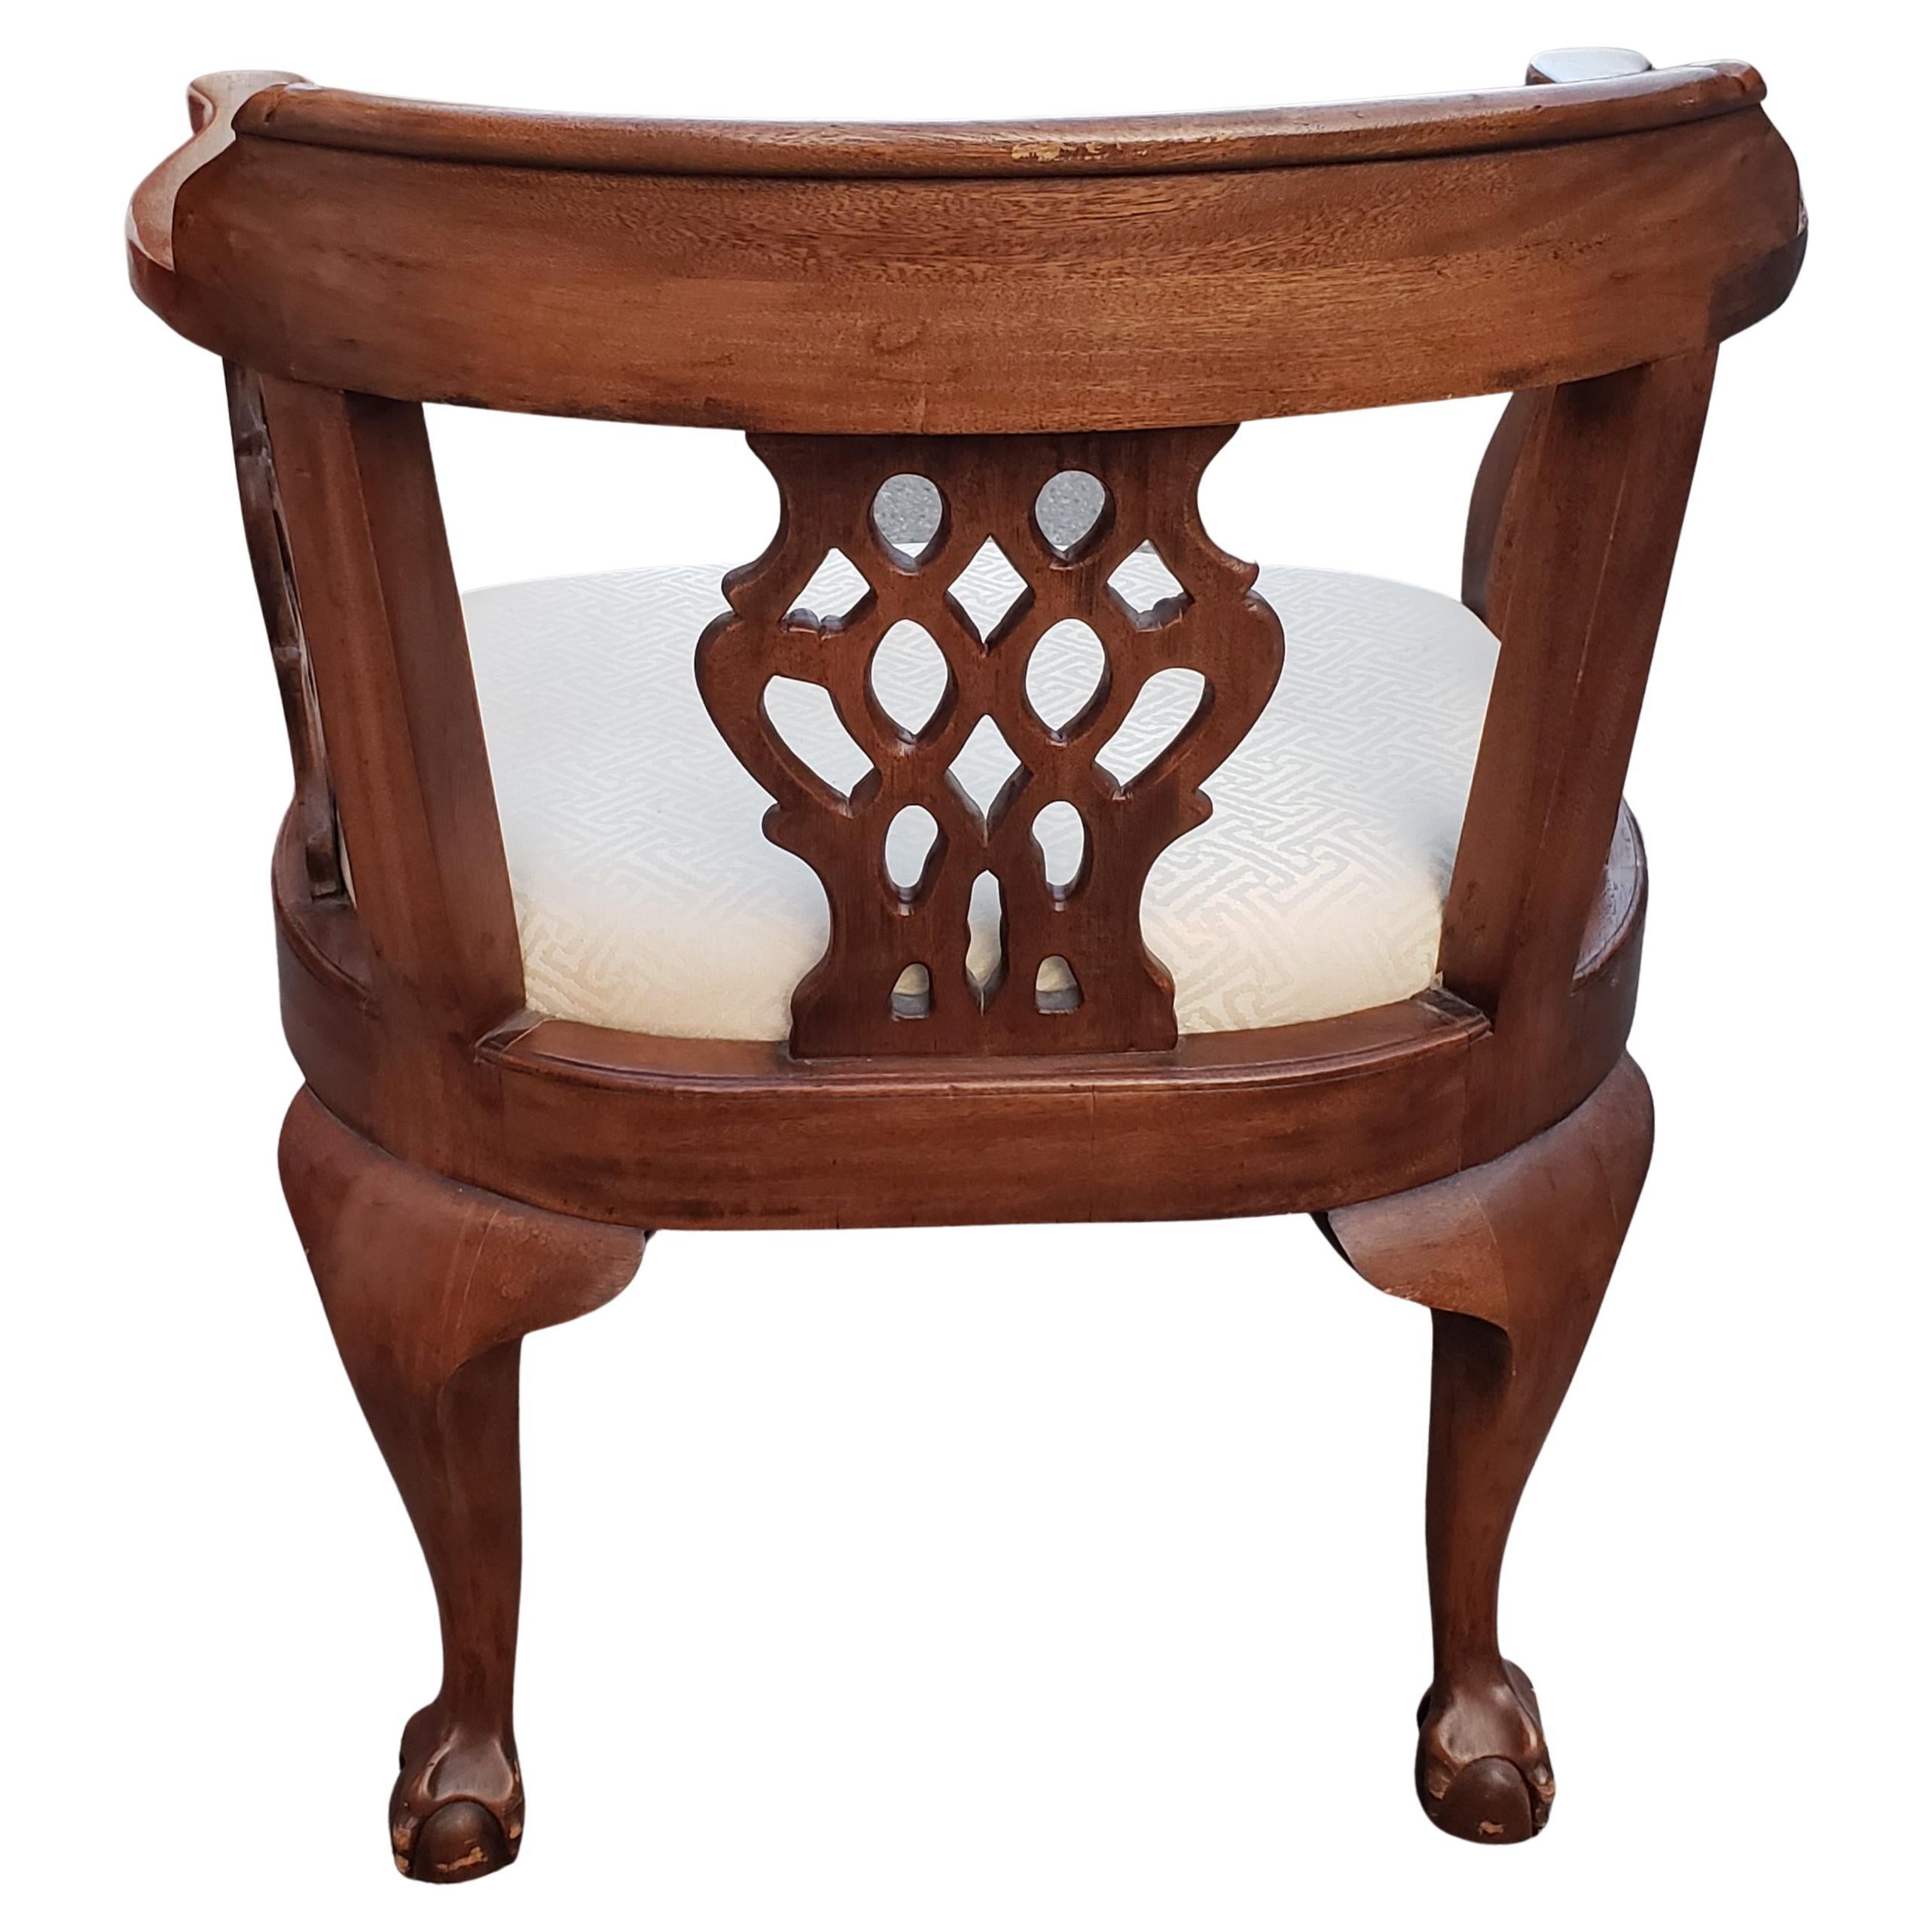 Hand-Carved Georgian Style Heavily Carved Mahogany Arm Chair with Ball and Claw Feet